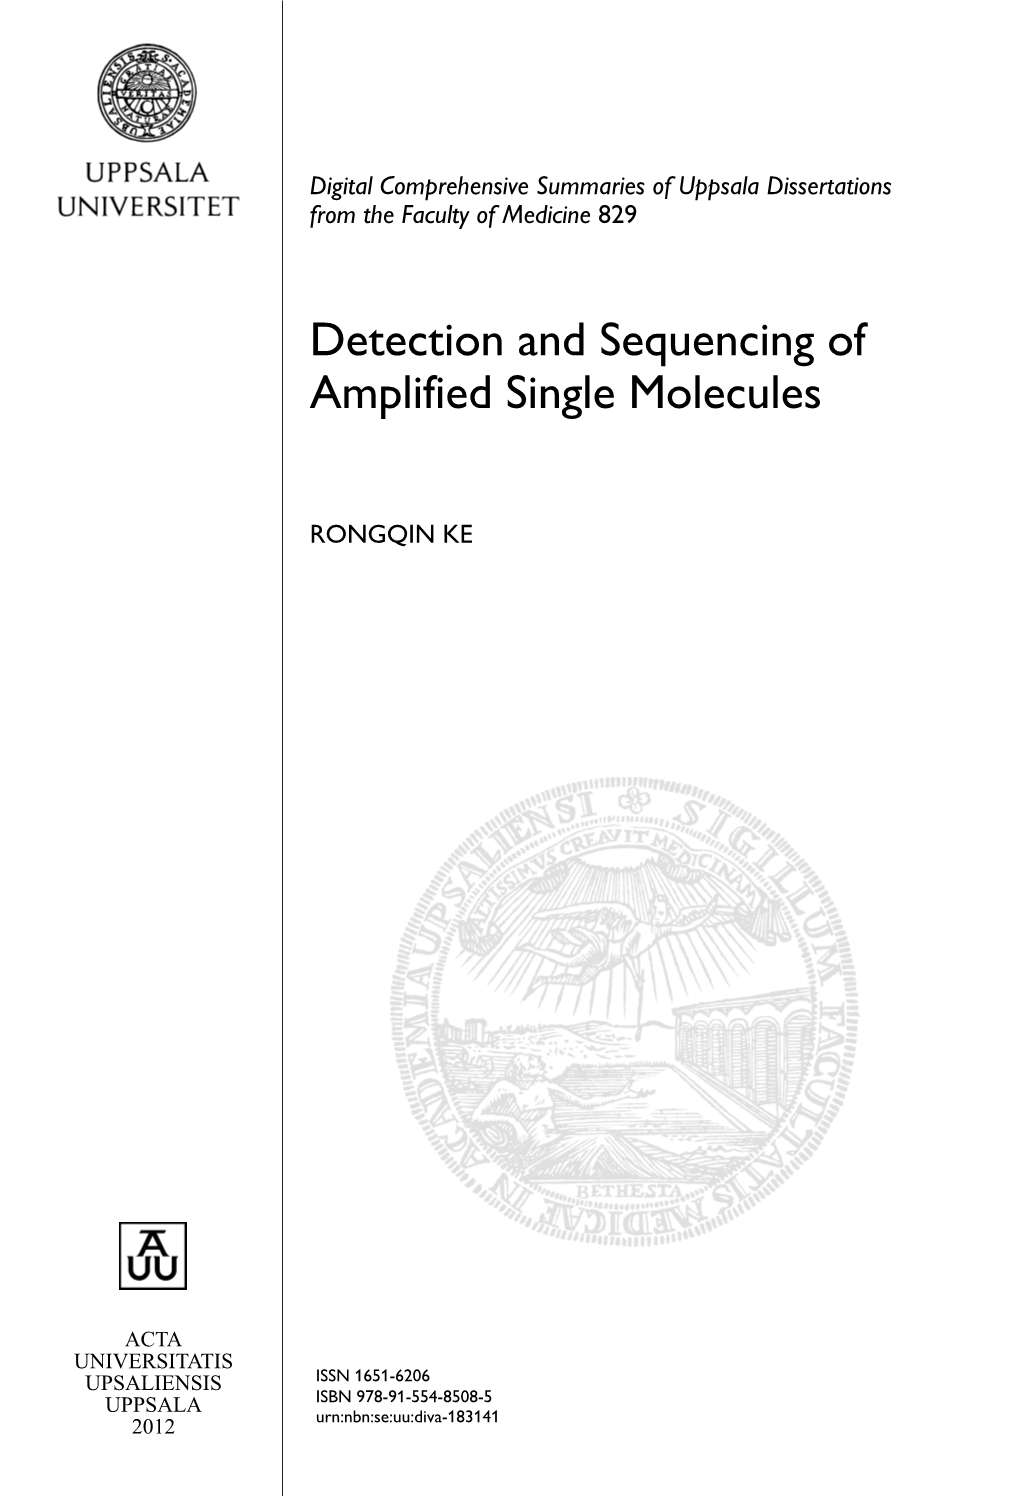 Detection and Sequencing of Amplified Single Molecules